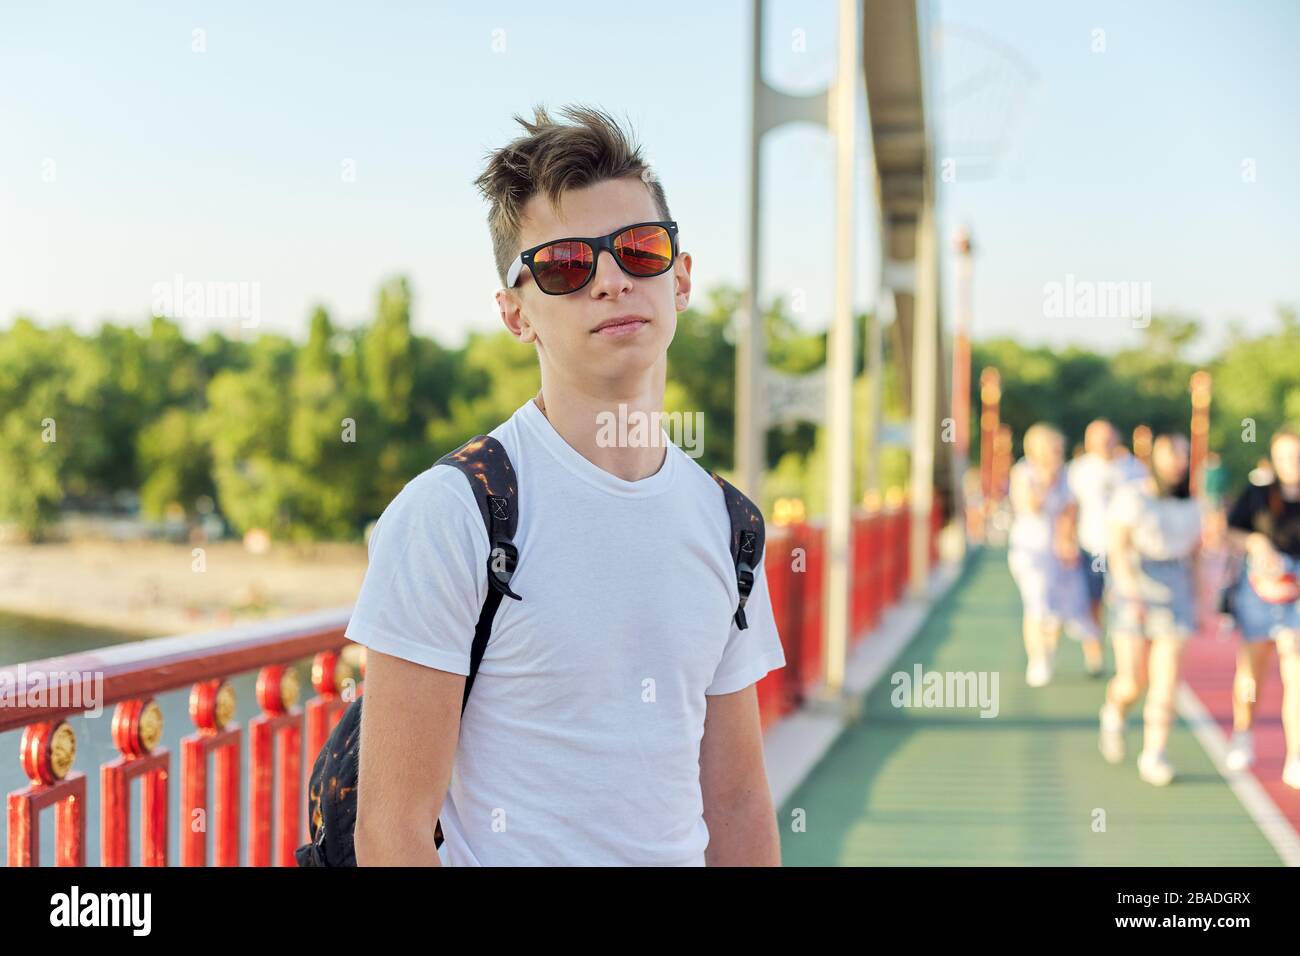 Teen boy 15 years old with fashionable hairstyle sunglasses